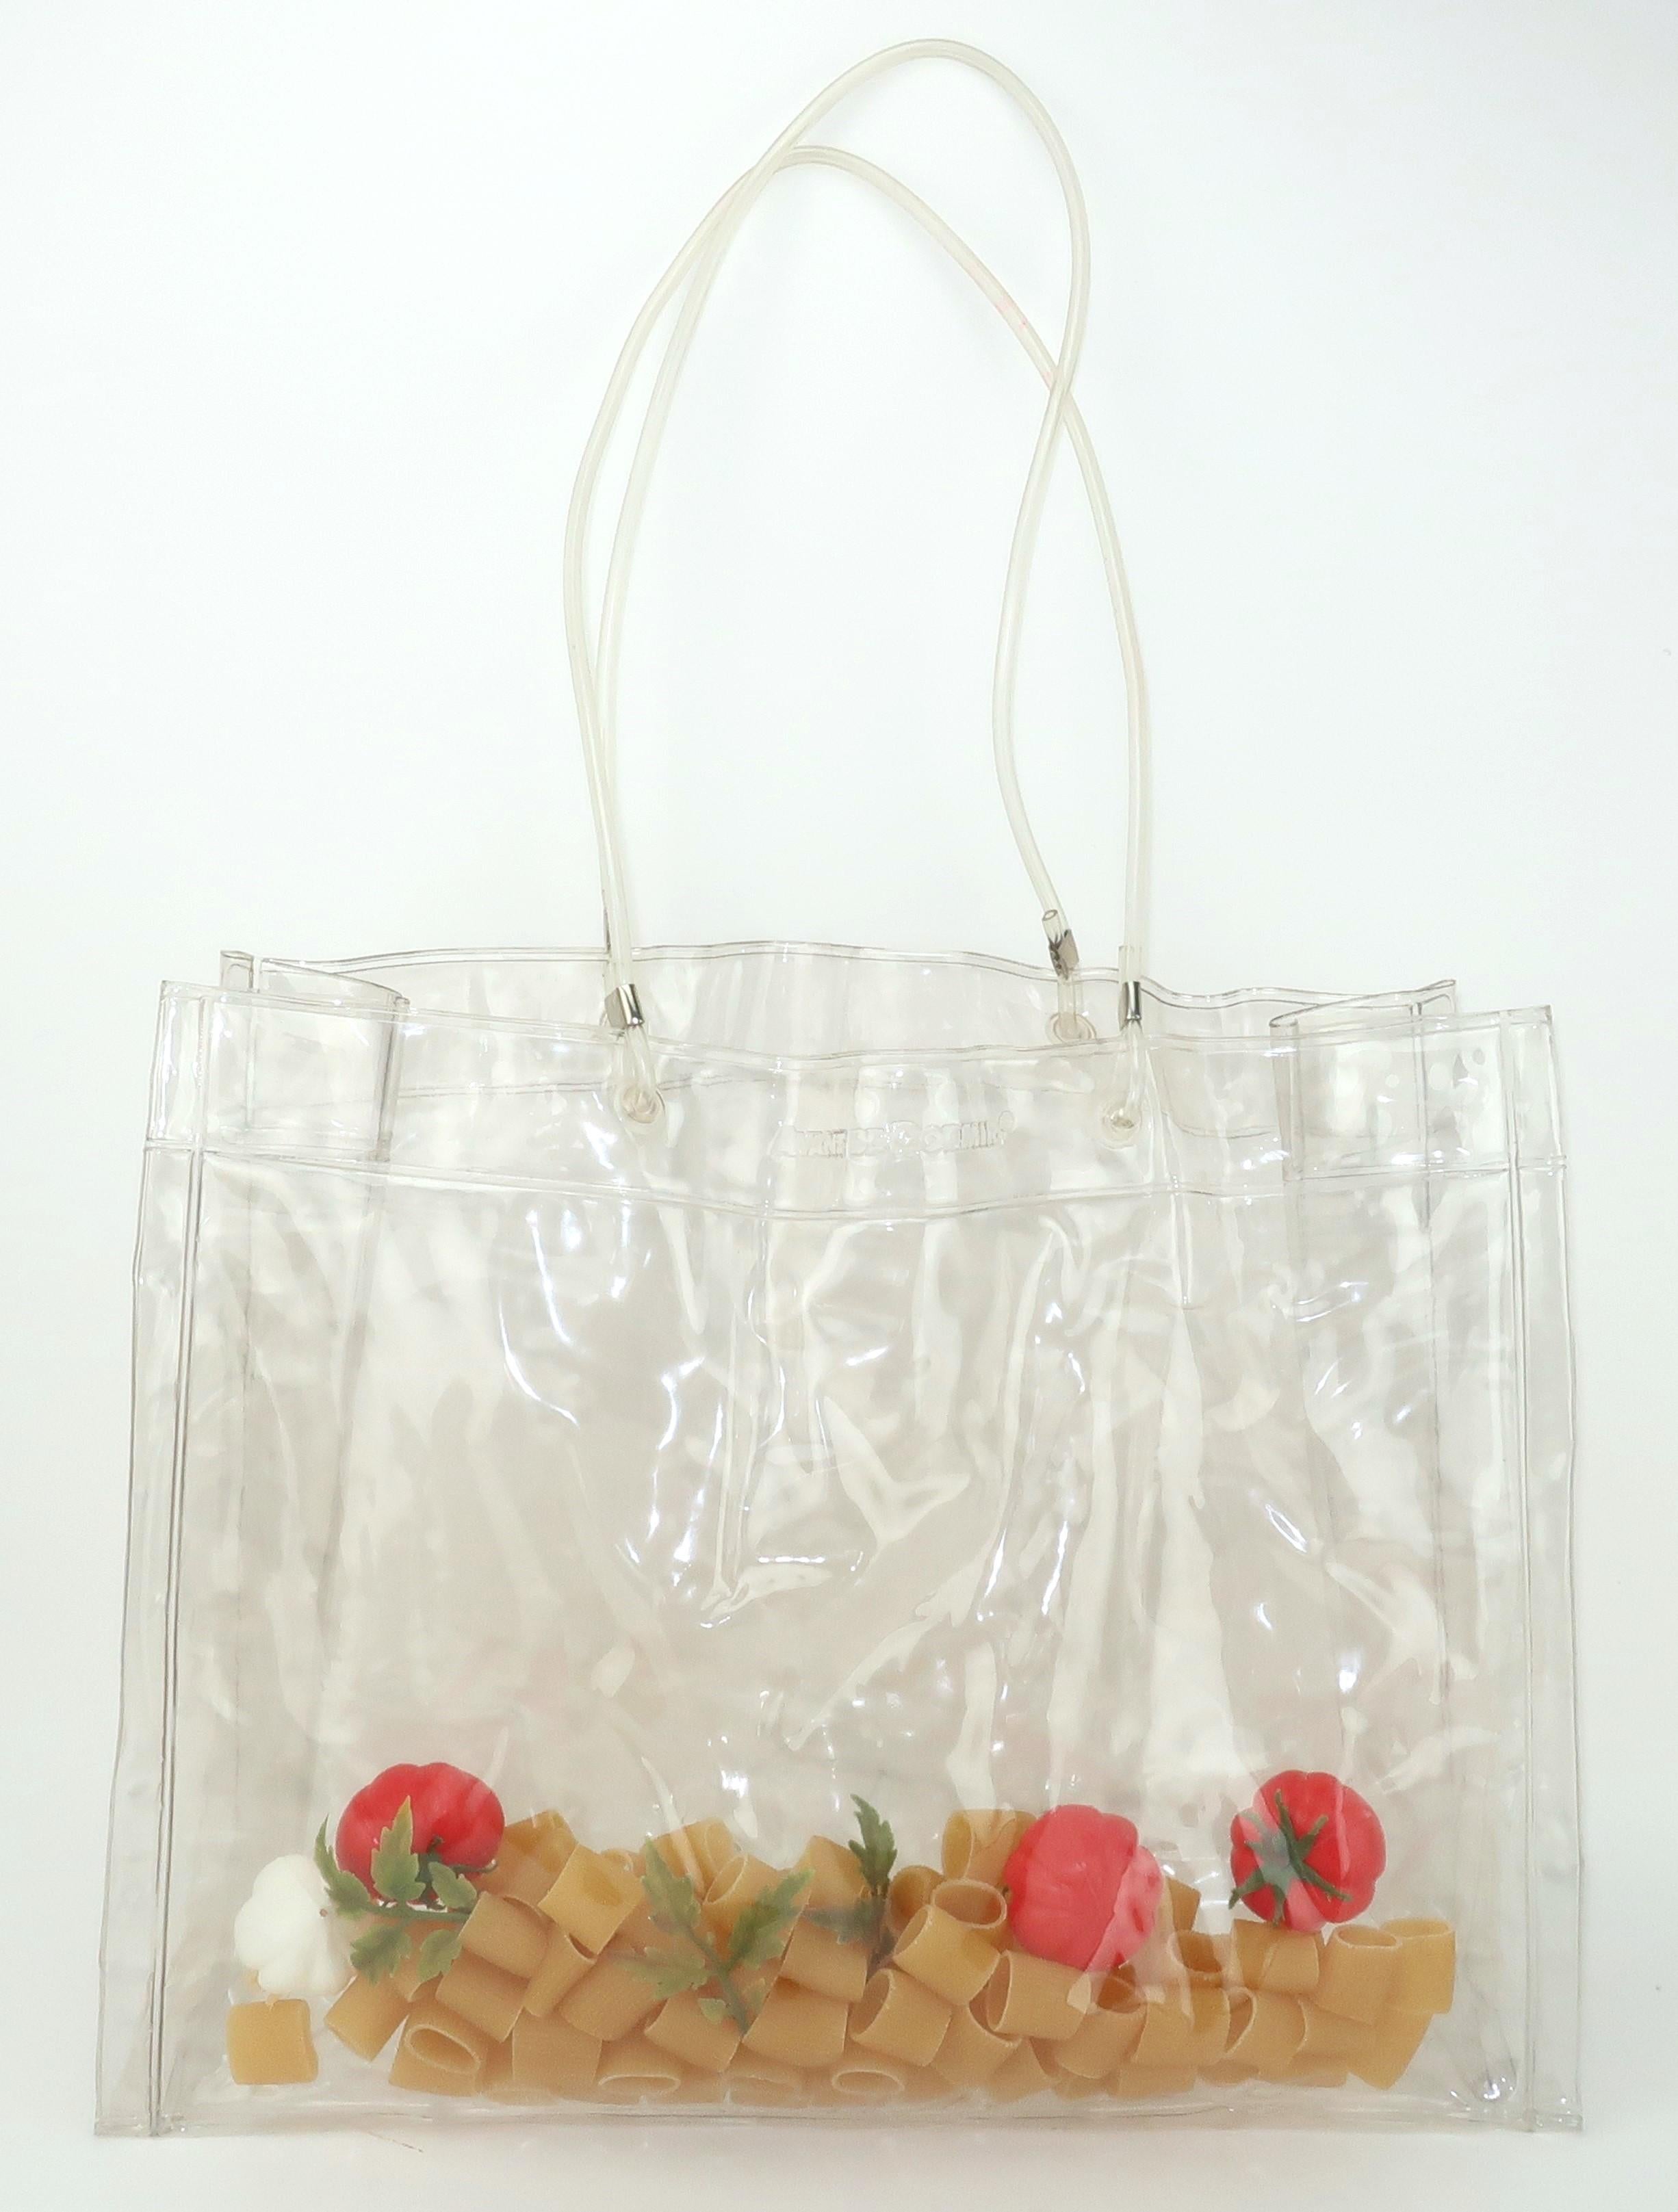 1980’s clear vinyl ‘Flashbags’ tote handbag by Italian design duo, Avant de Dormir.  The clear vinyl serves as a clever window to a mix of a dinner ingredients … pasta, tomatoes, garlic and parsley.  Just a touch of surrealism for this fashion